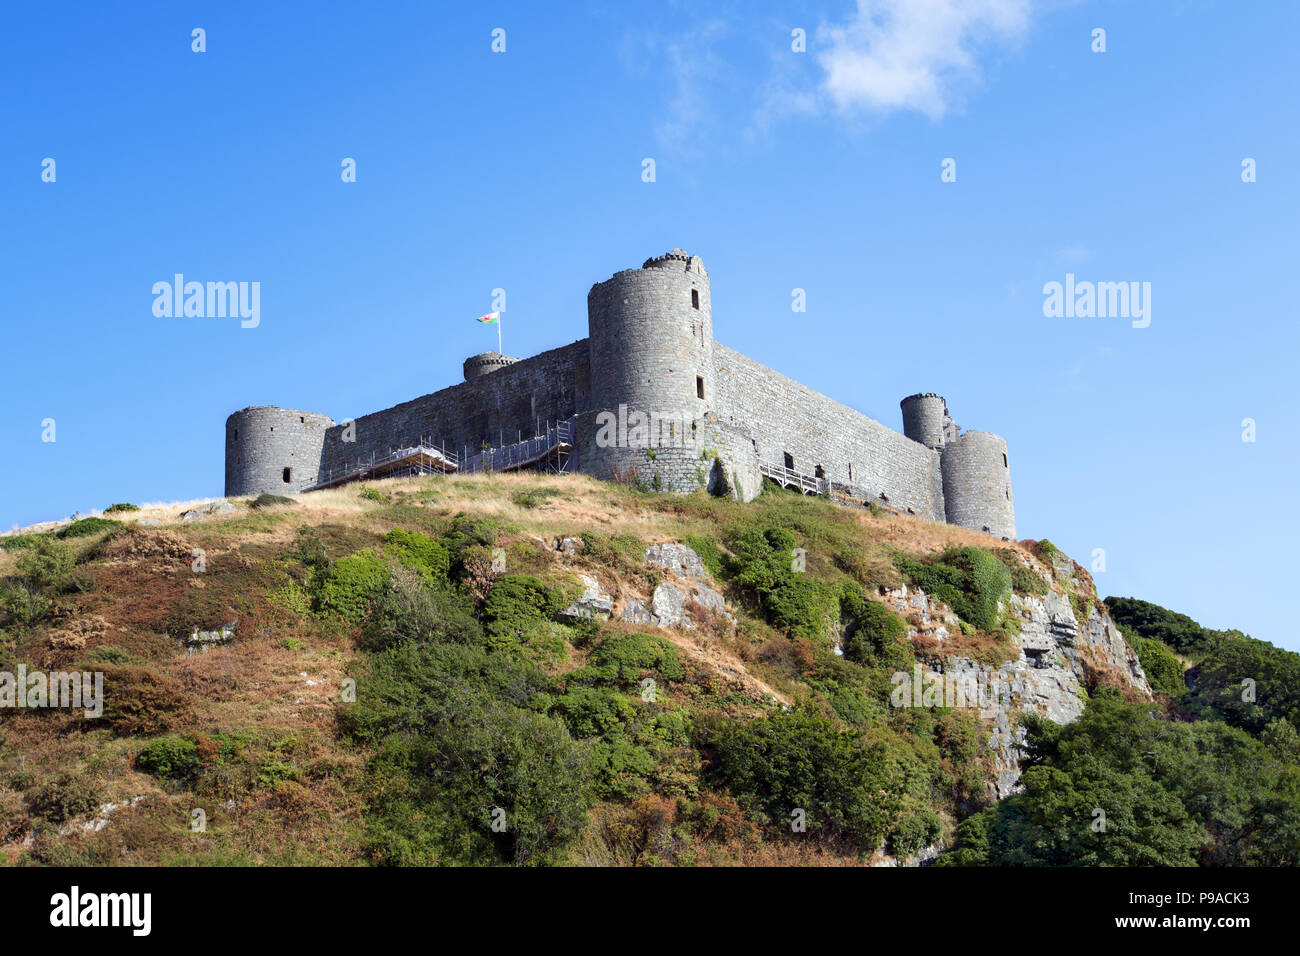 Harlech Castle in Harlech, Wales, is a medieval fortification built by Edward I during his invasion of Wales between 1282 and 1289. Stock Photo